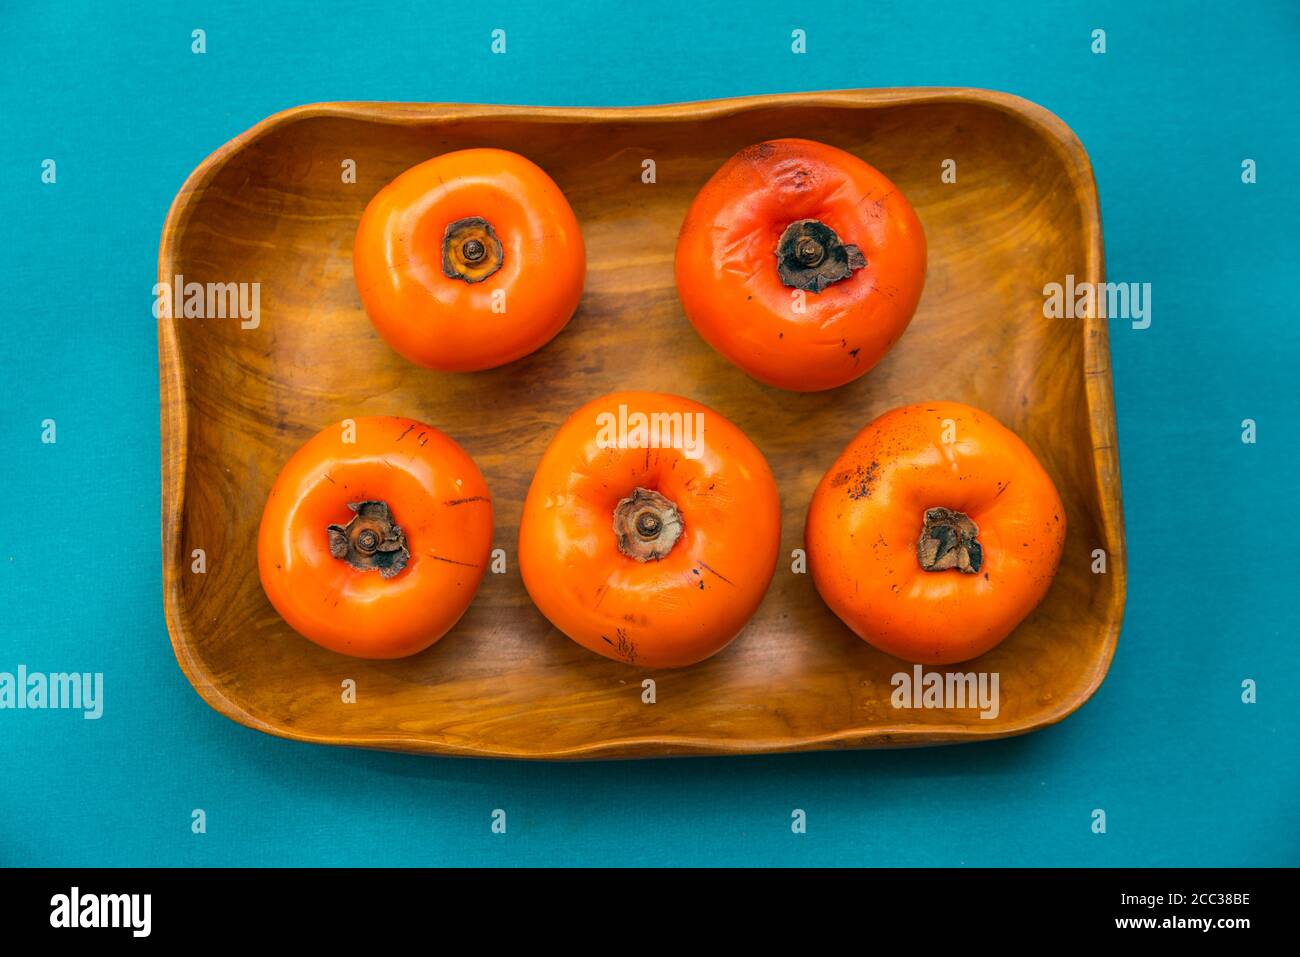 Top view of persimmon fruits in a wood bowl and a blue background. Stock Photo